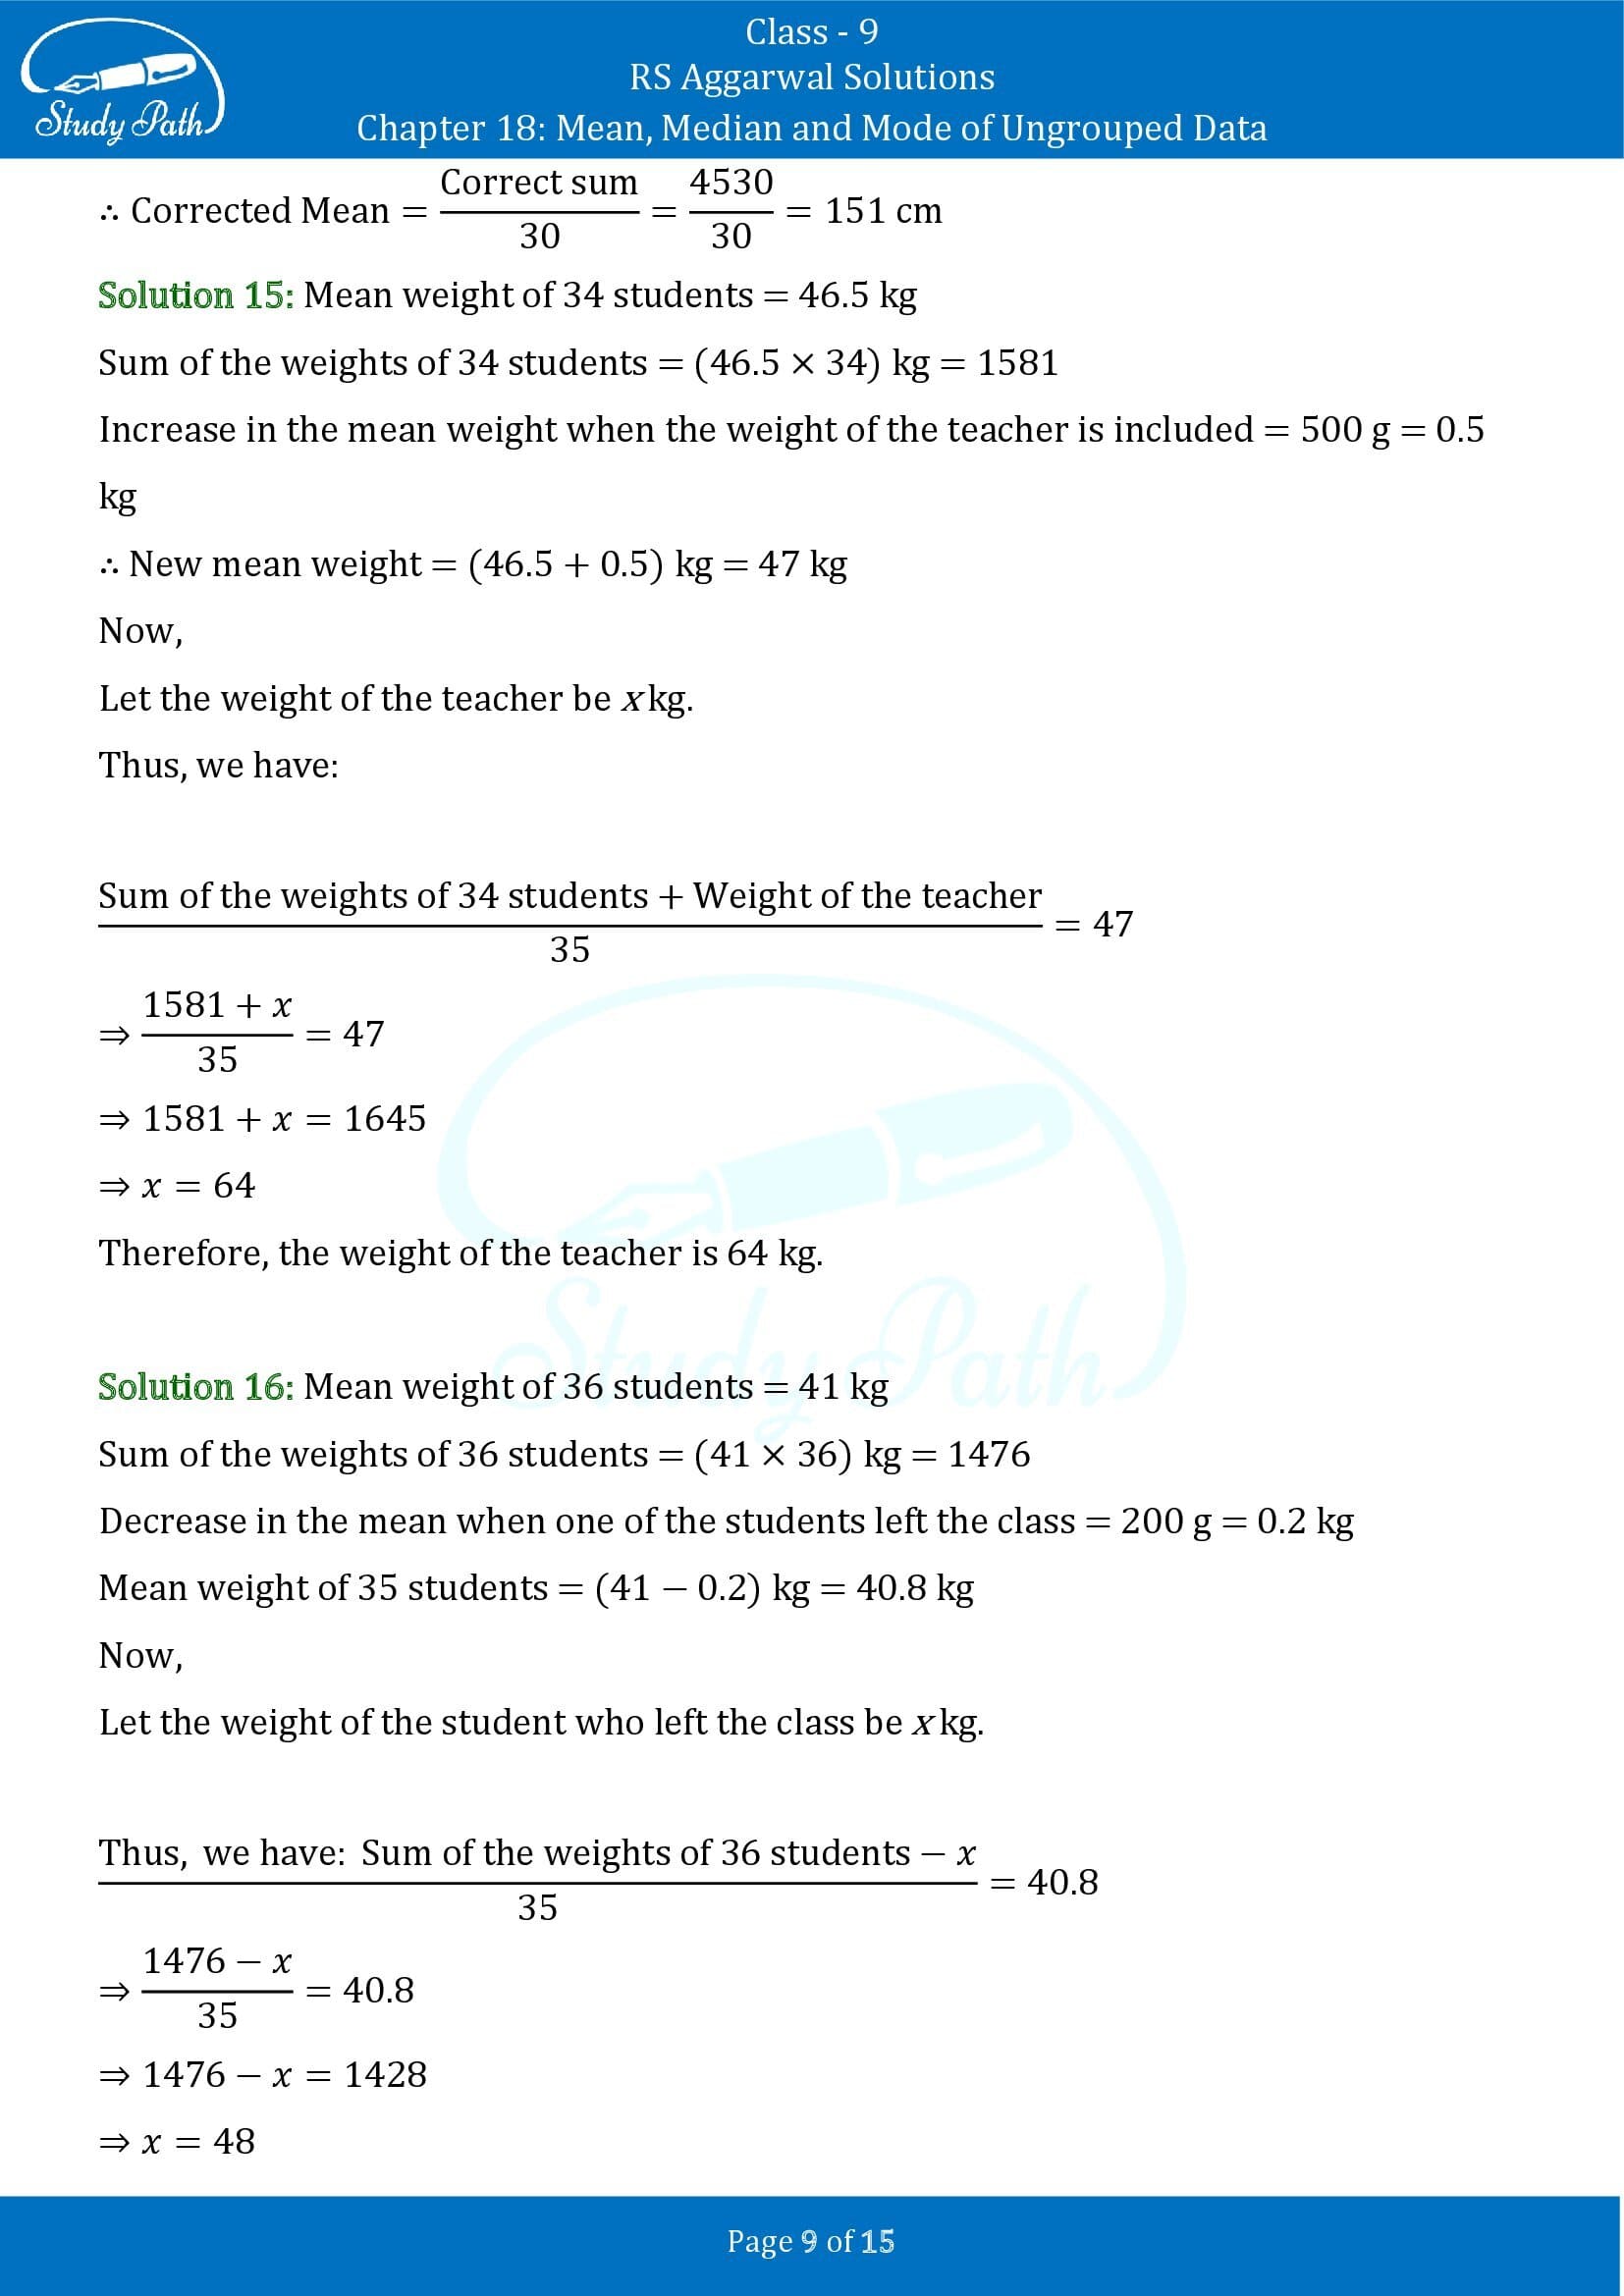 RS Aggarwal Solutions Class 9 Chapter 18 Mean Median and Mode of Ungrouped Data Exercise 18A 00009